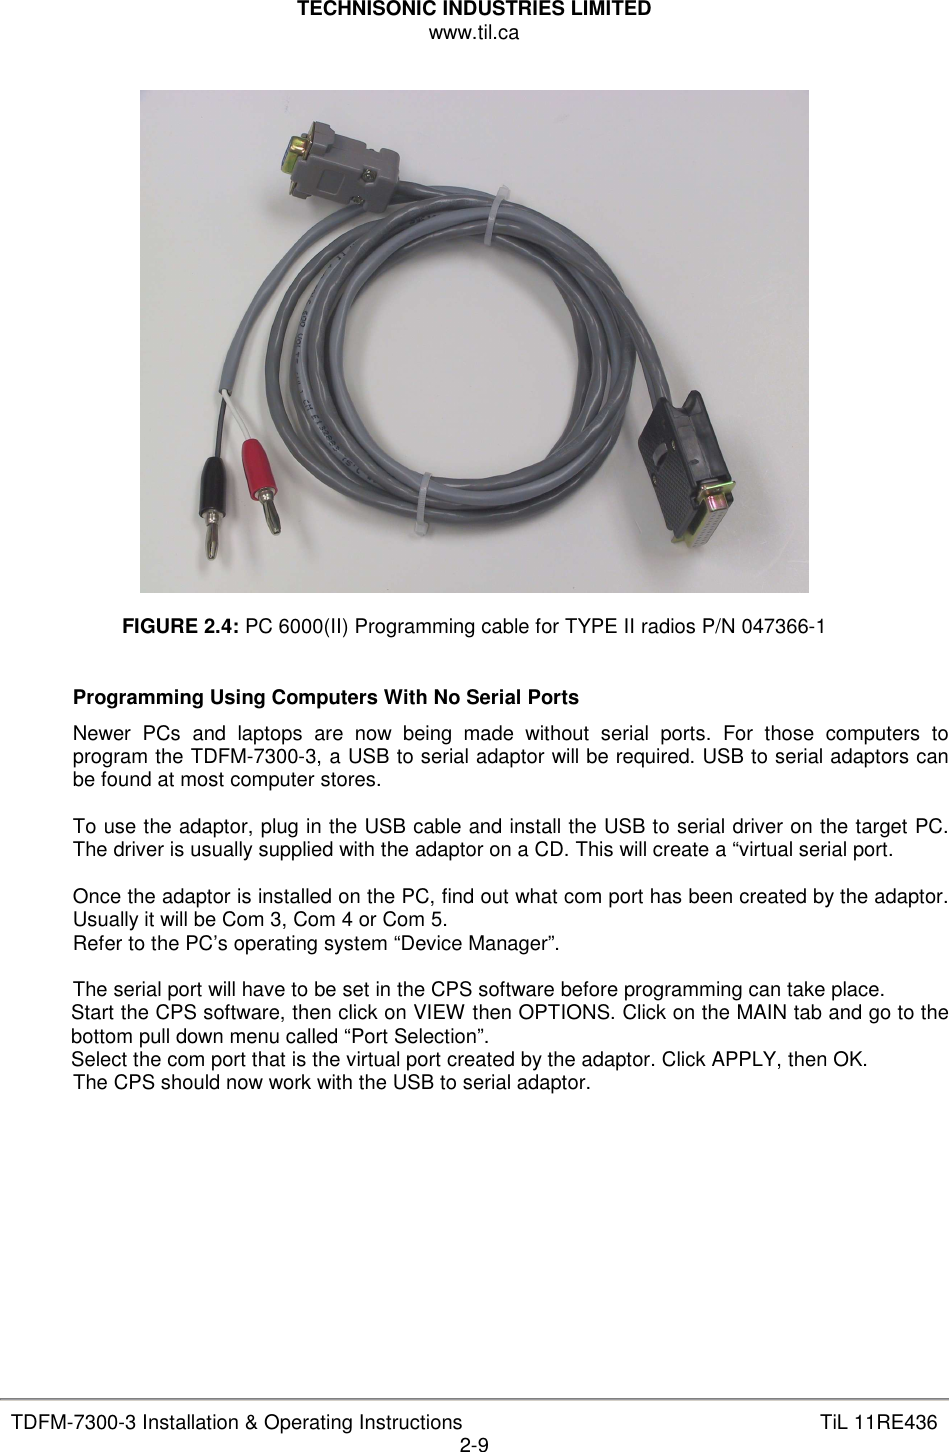 TECHNISONIC INDUSTRIES LIMITED www.til.ca   TDFM-7300-3 Installation &amp; Operating Instructions  TiL 11RE436 2-9    FIGURE 2.4: PC 6000(II) Programming cable for TYPE II radios P/N 047366-1   Programming Using Computers With No Serial Ports Newer  PCs  and  laptops  are  now  being  made  without  serial  ports.  For  those  computers  to program the TDFM-7300-3, a USB to serial adaptor will be required. USB to serial adaptors can be found at most computer stores.  To use the adaptor, plug in the USB cable and install the USB to serial driver on the target PC. The driver is usually supplied with the adaptor on a CD. This will create a “virtual serial port.  Once the adaptor is installed on the PC, find out what com port has been created by the adaptor. Usually it will be Com 3, Com 4 or Com 5. Refer to the PC’s operating system “Device Manager”.  The serial port will have to be set in the CPS software before programming can take place. Start the CPS software, then click on VIEW then OPTIONS. Click on the MAIN tab and go to the bottom pull down menu called “Port Selection”. Select the com port that is the virtual port created by the adaptor. Click APPLY, then OK. The CPS should now work with the USB to serial adaptor.         